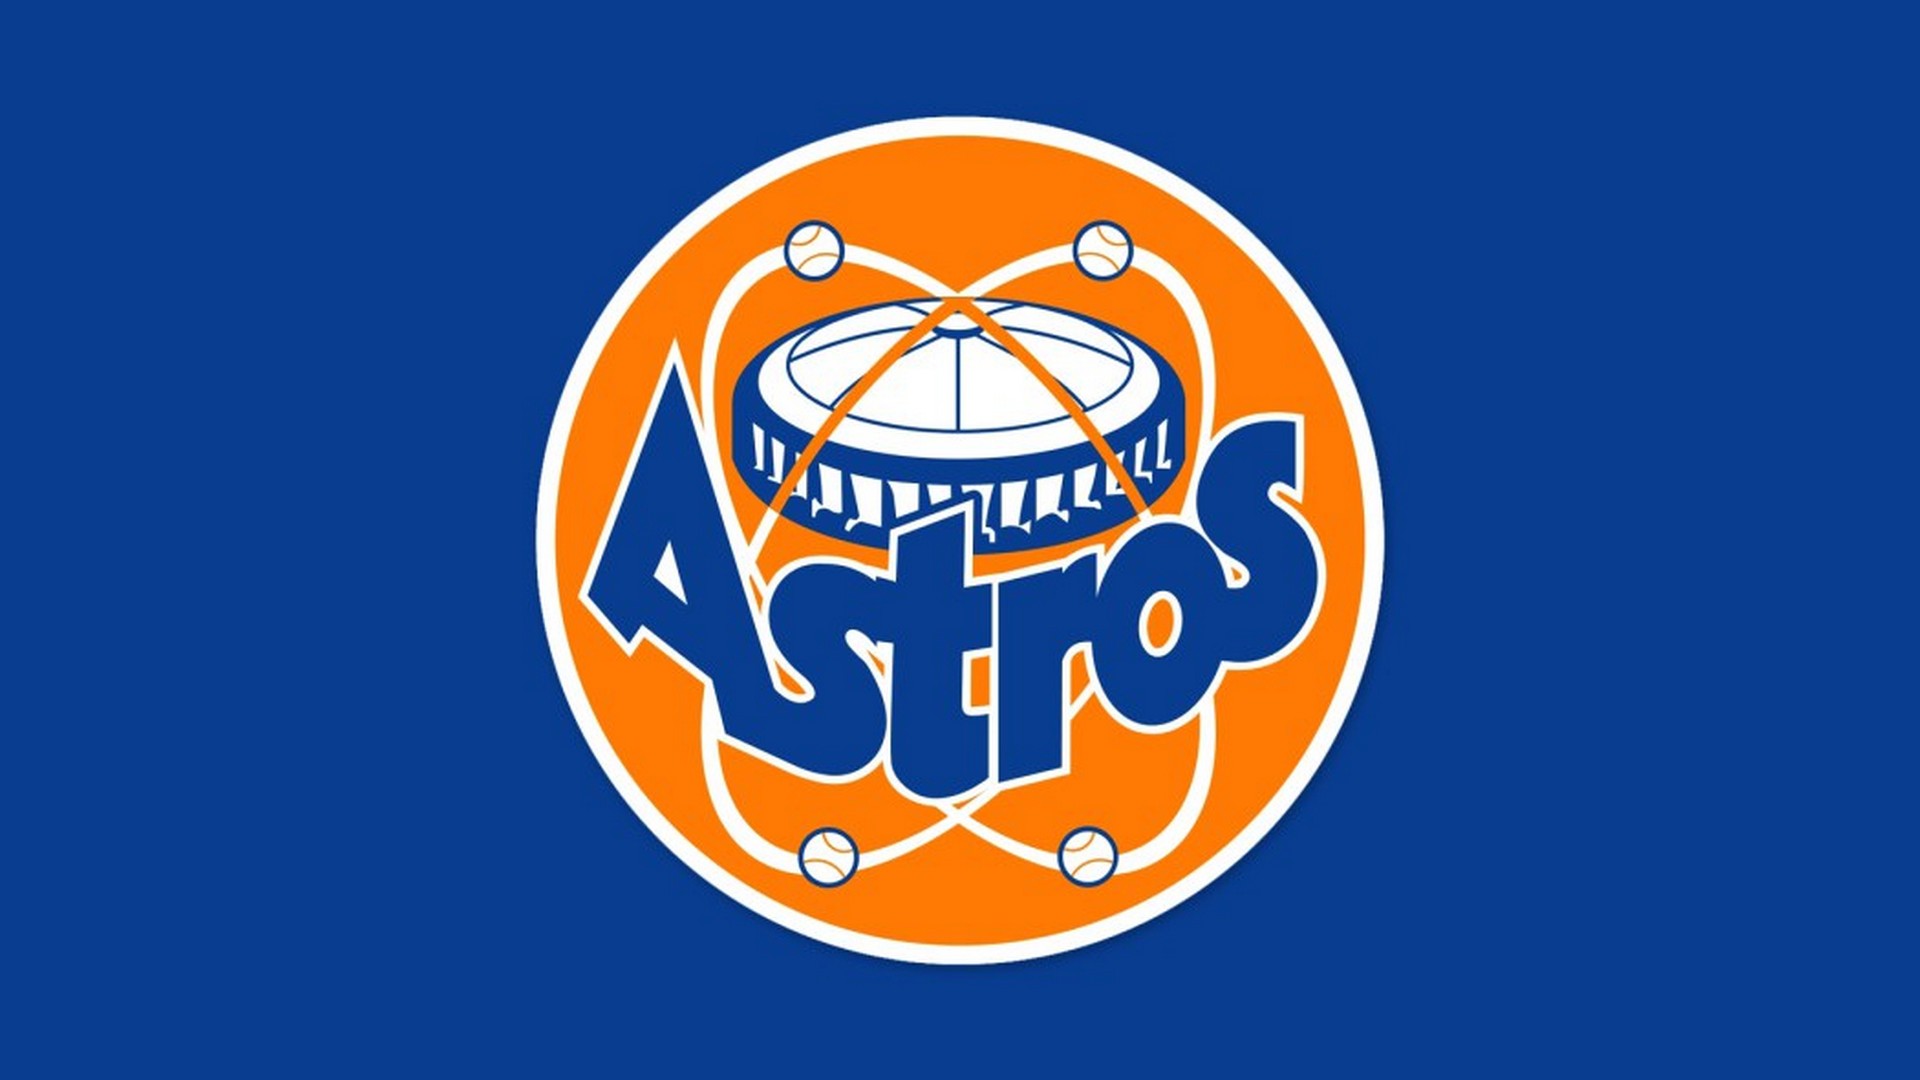 Houston Astros Logo Wallpaper For Mac with high-resolution 1920x1080 pixel. You can use this wallpaper for Mac Desktop Wallpaper, Laptop Screensavers, Android Wallpapers, Tablet or iPhone Home Screen and another mobile phone device